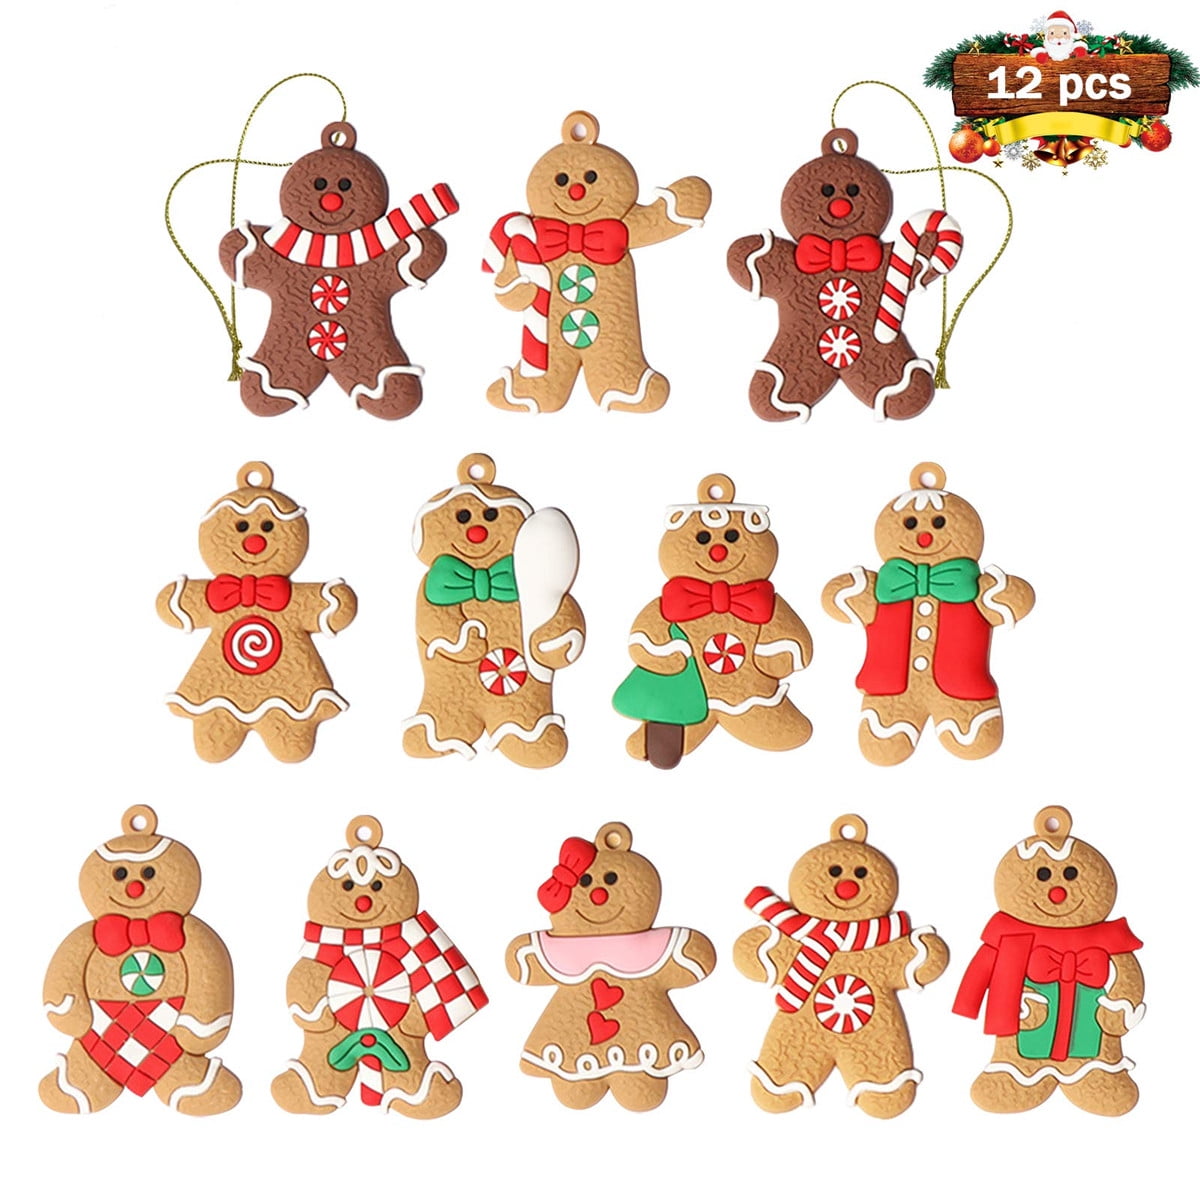 Gingerbread Man Cookie Christmas Ornament Fake Food Green Scarf R 